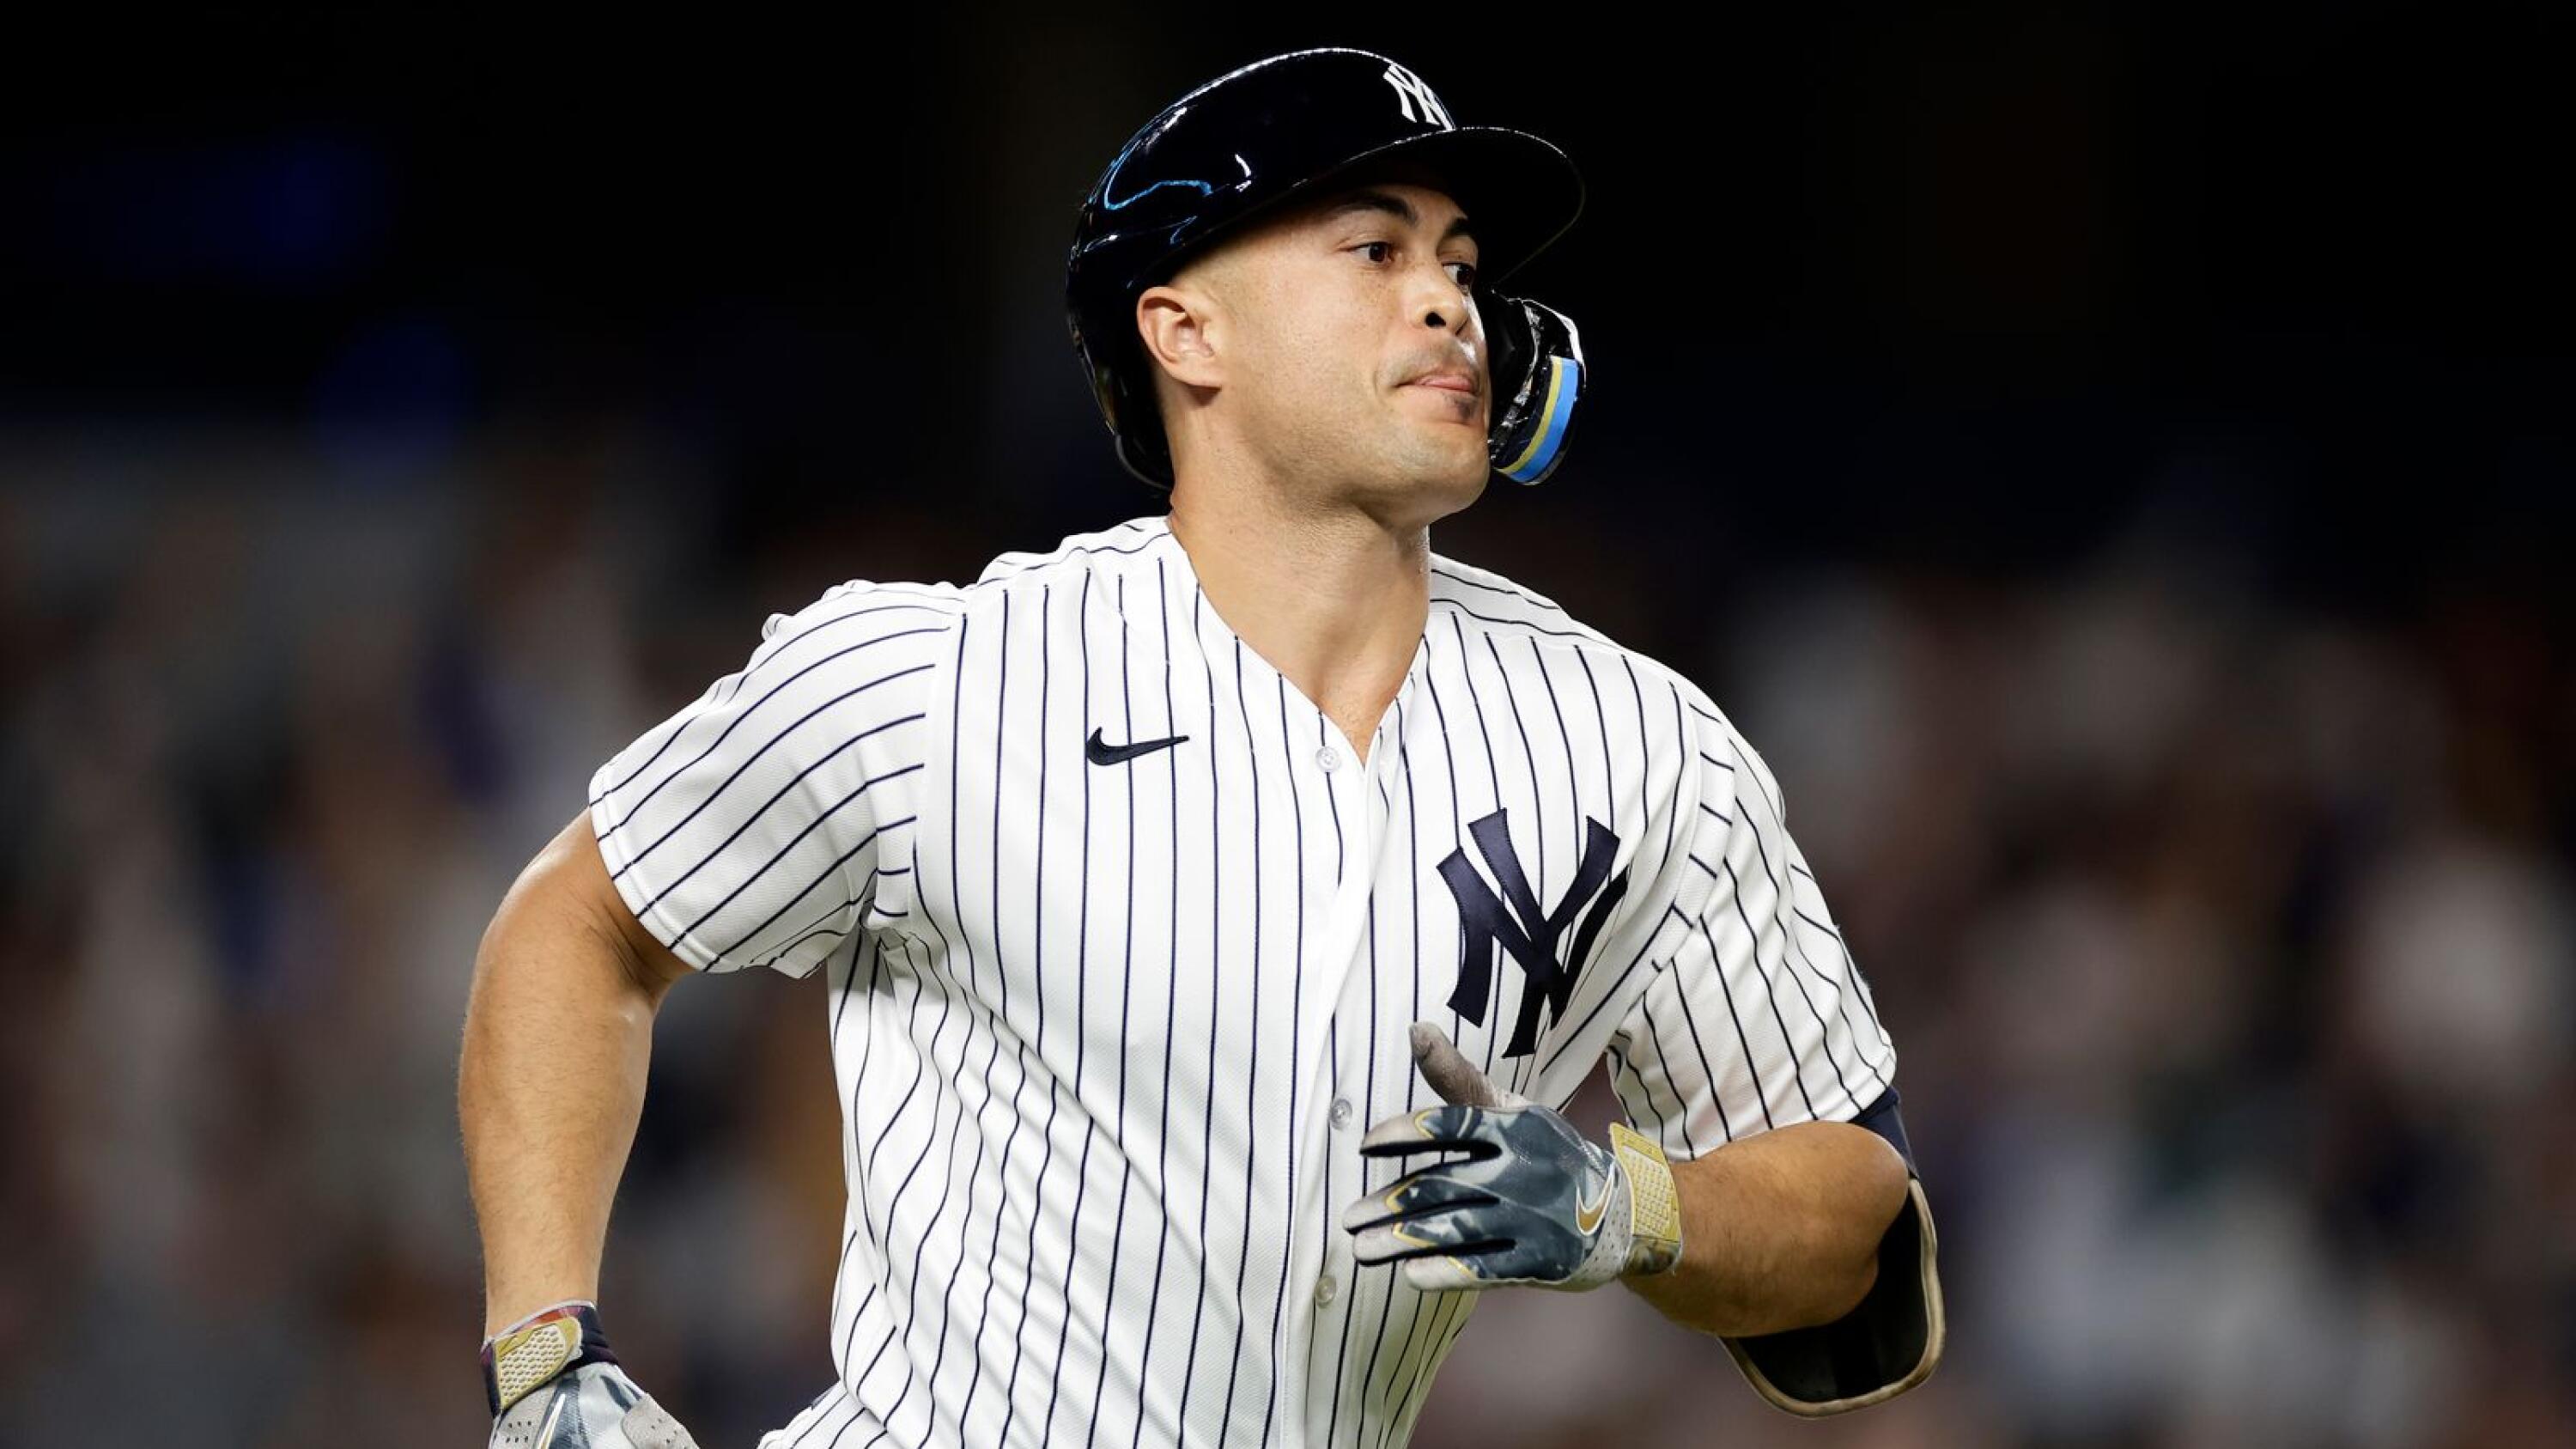 Giancarlo Stanton hit one of the hardest home runs recorded in Team USA's  win